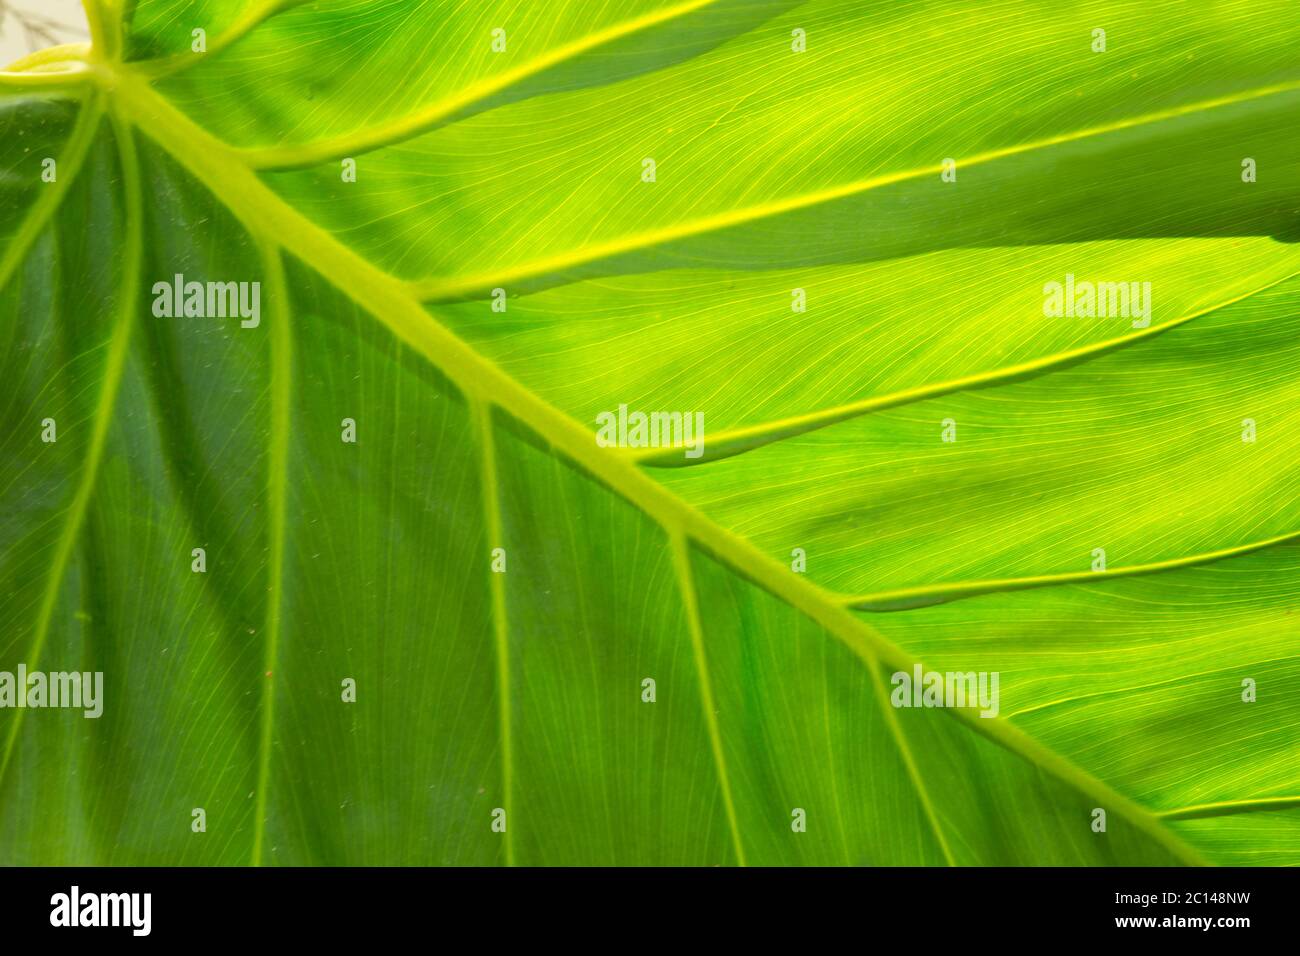 Close up of green leaf texture. Banque D'Images